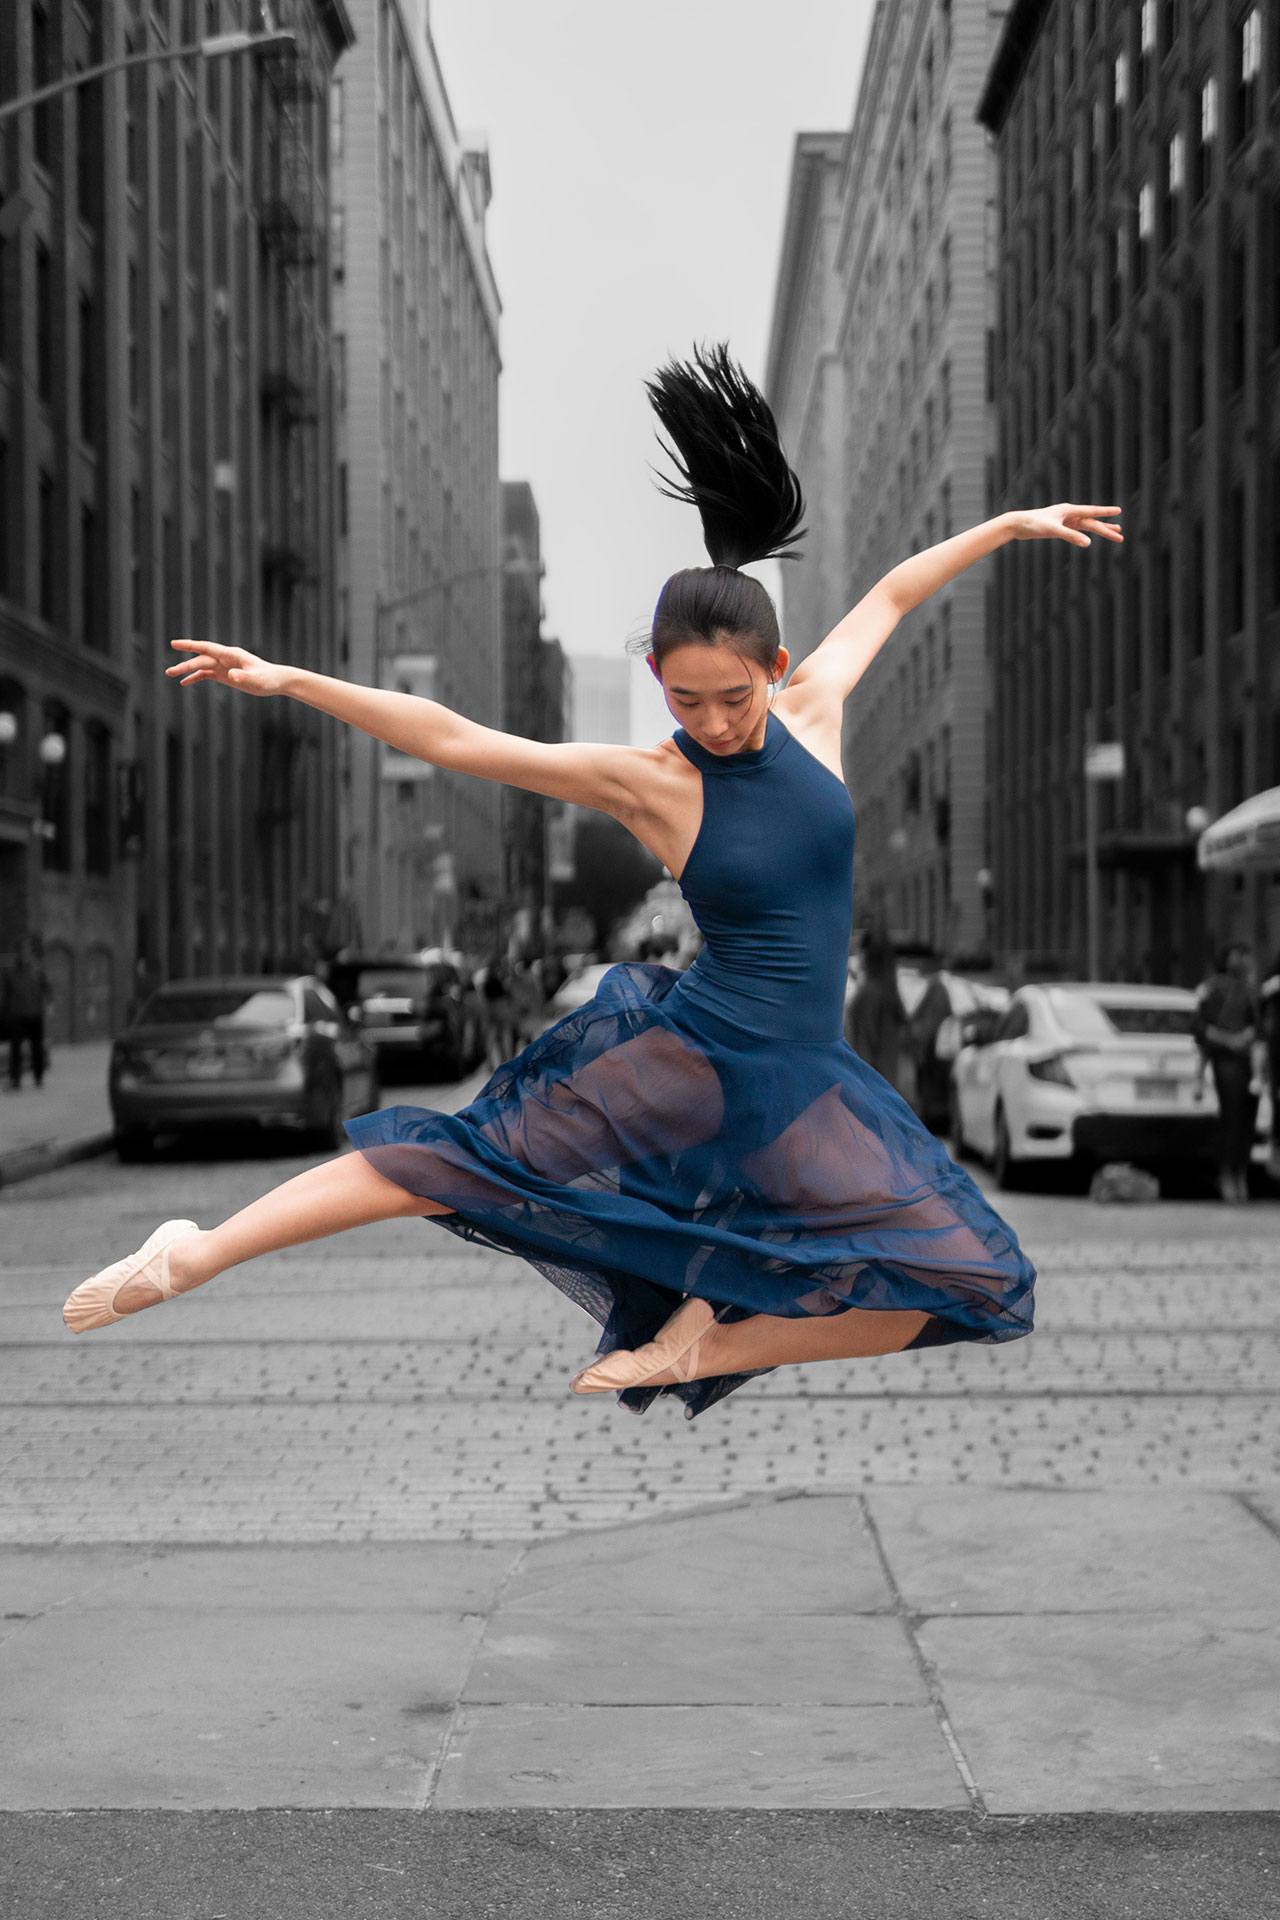 Dancer leaps in the air in the middle of a cobblestone street in Brooklyn.